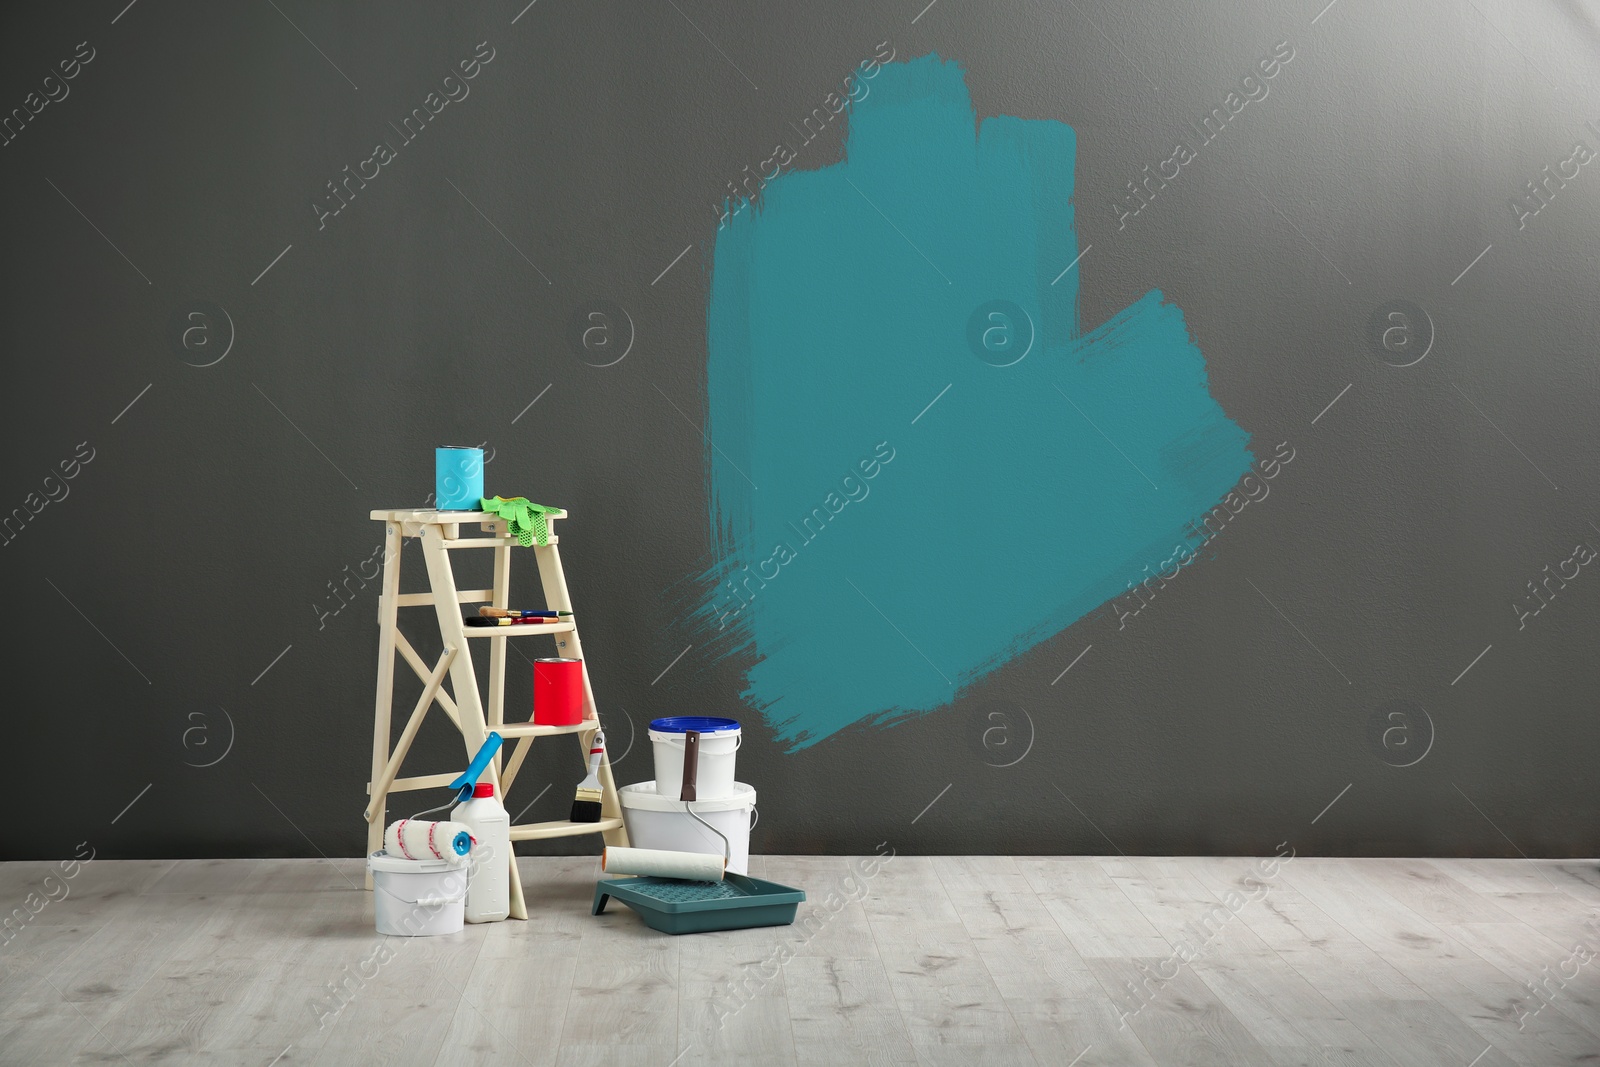 Image of Set with decorator's tools and paint on floor near grey wall